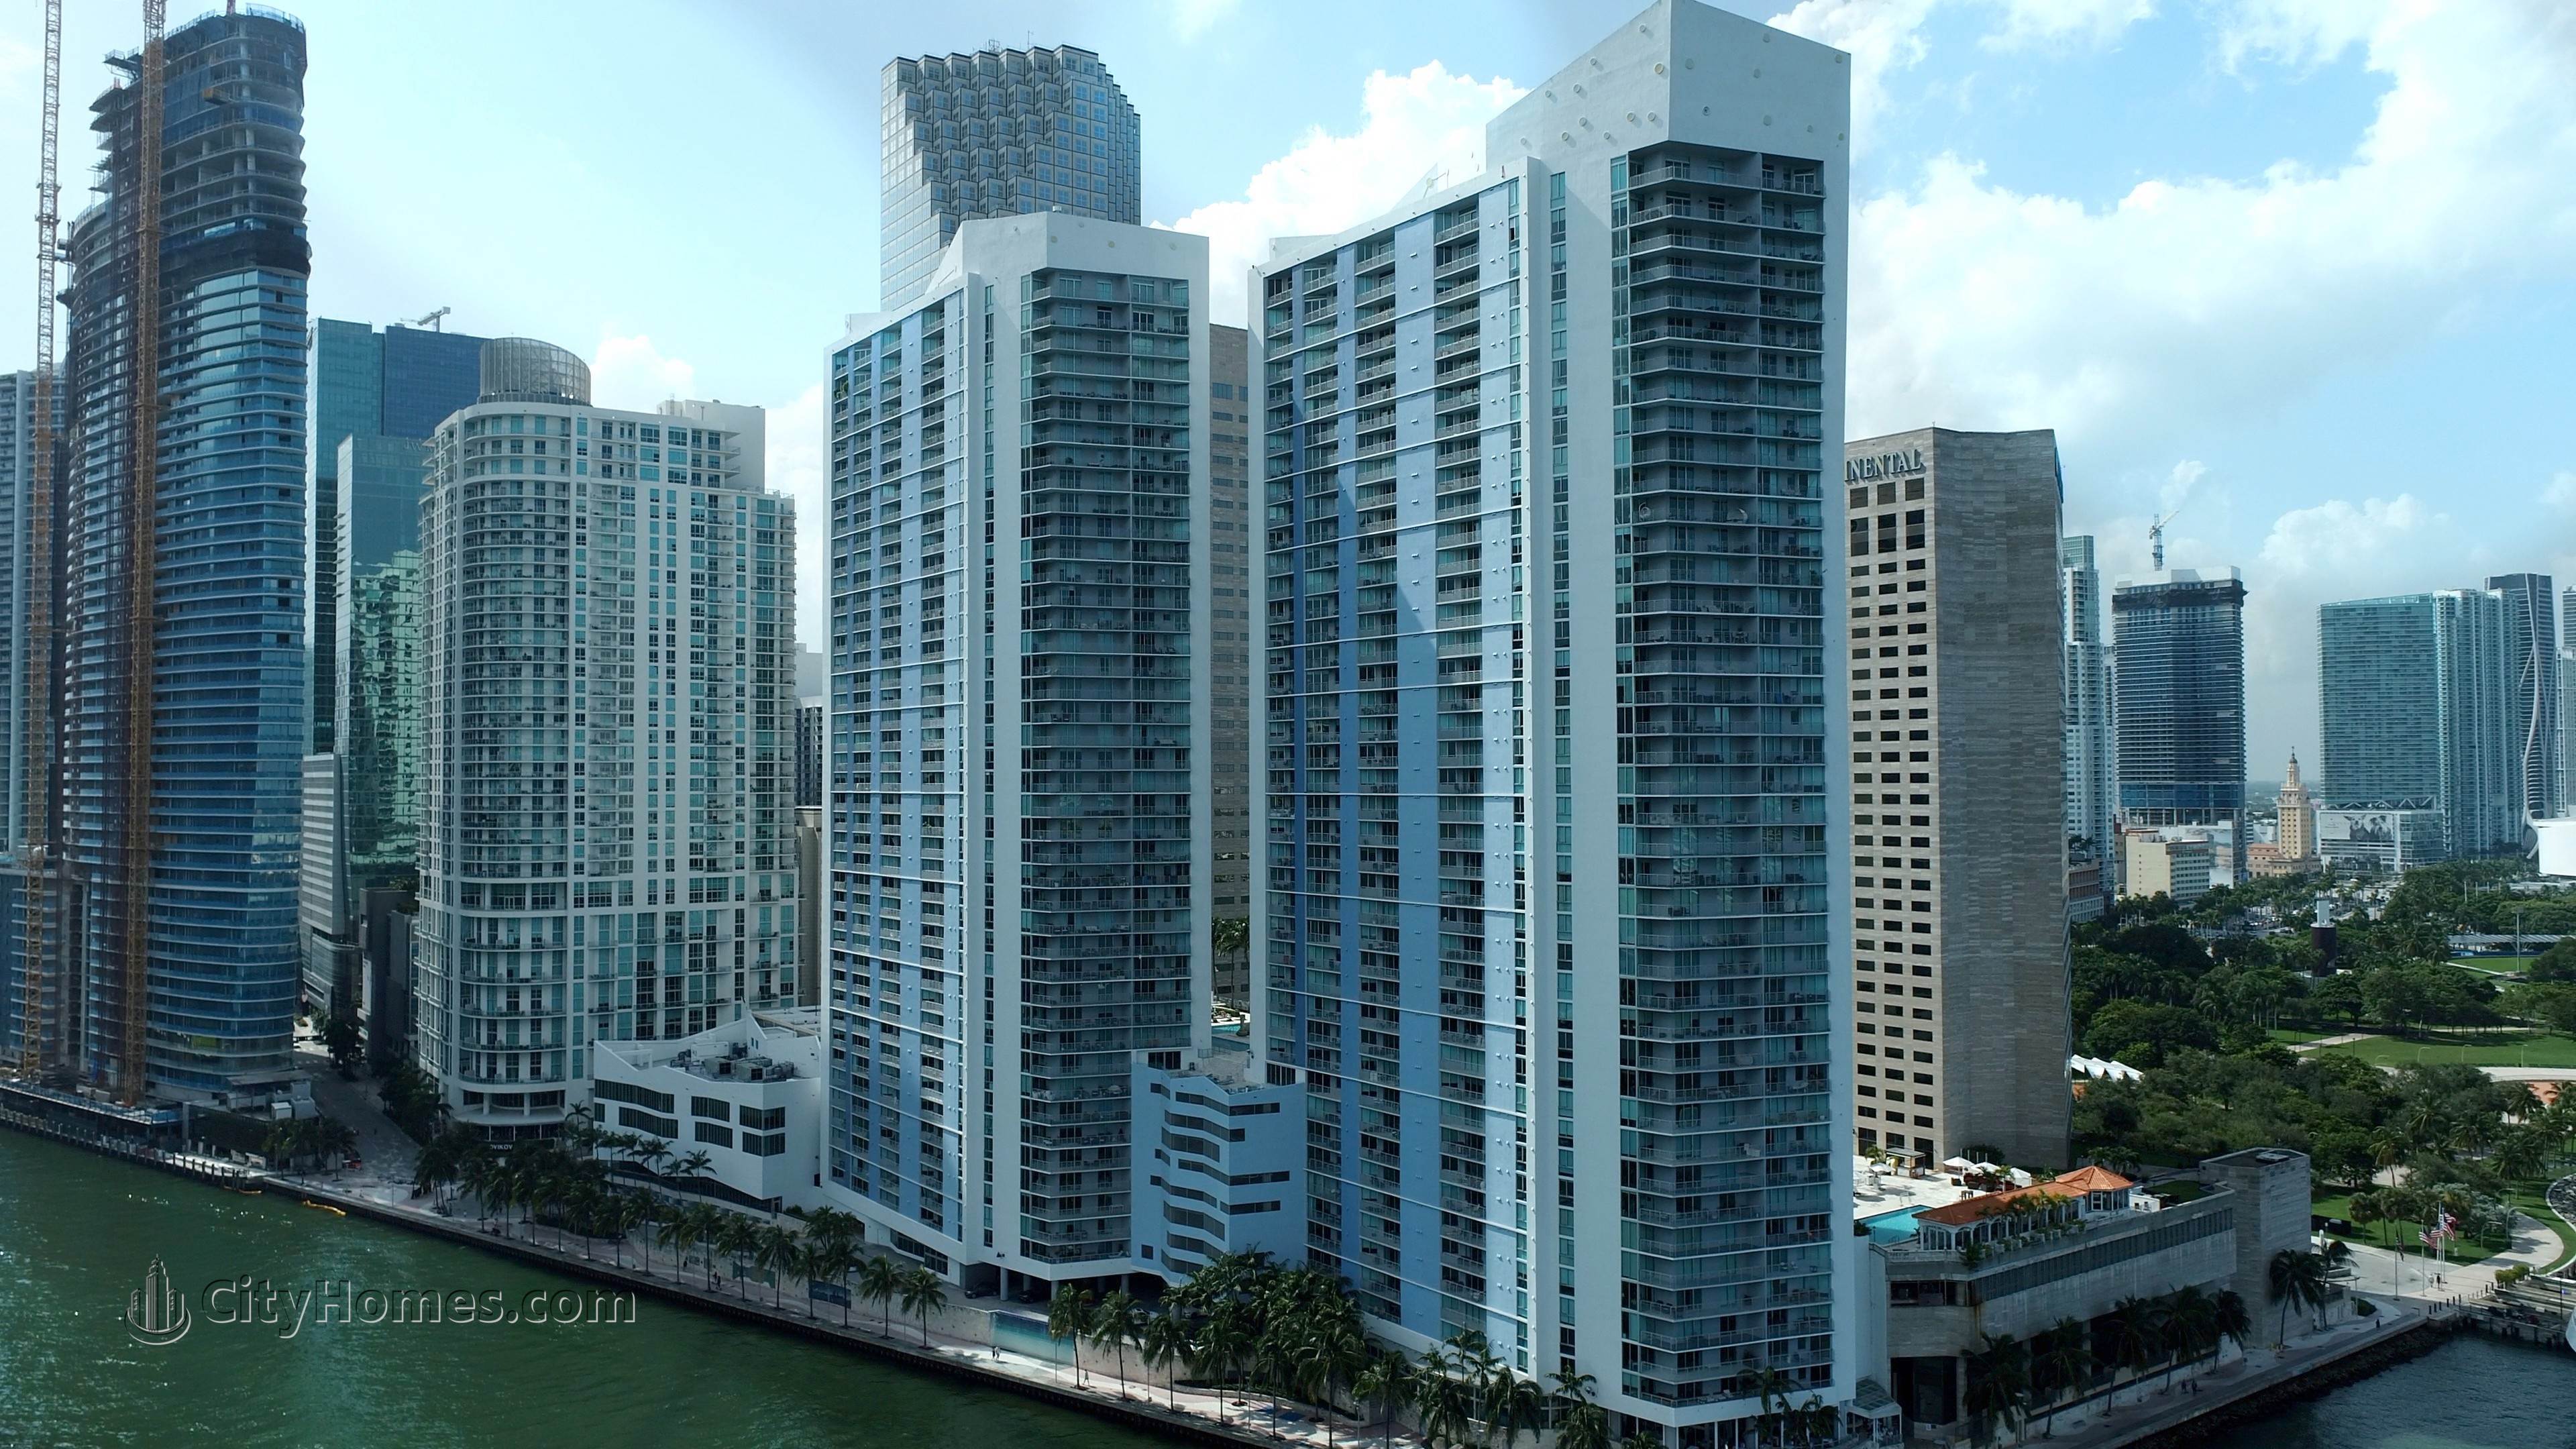 2. One Miami xây dựng tại 325 And 335 S Biscayne Blvd, Miami, FL 33131